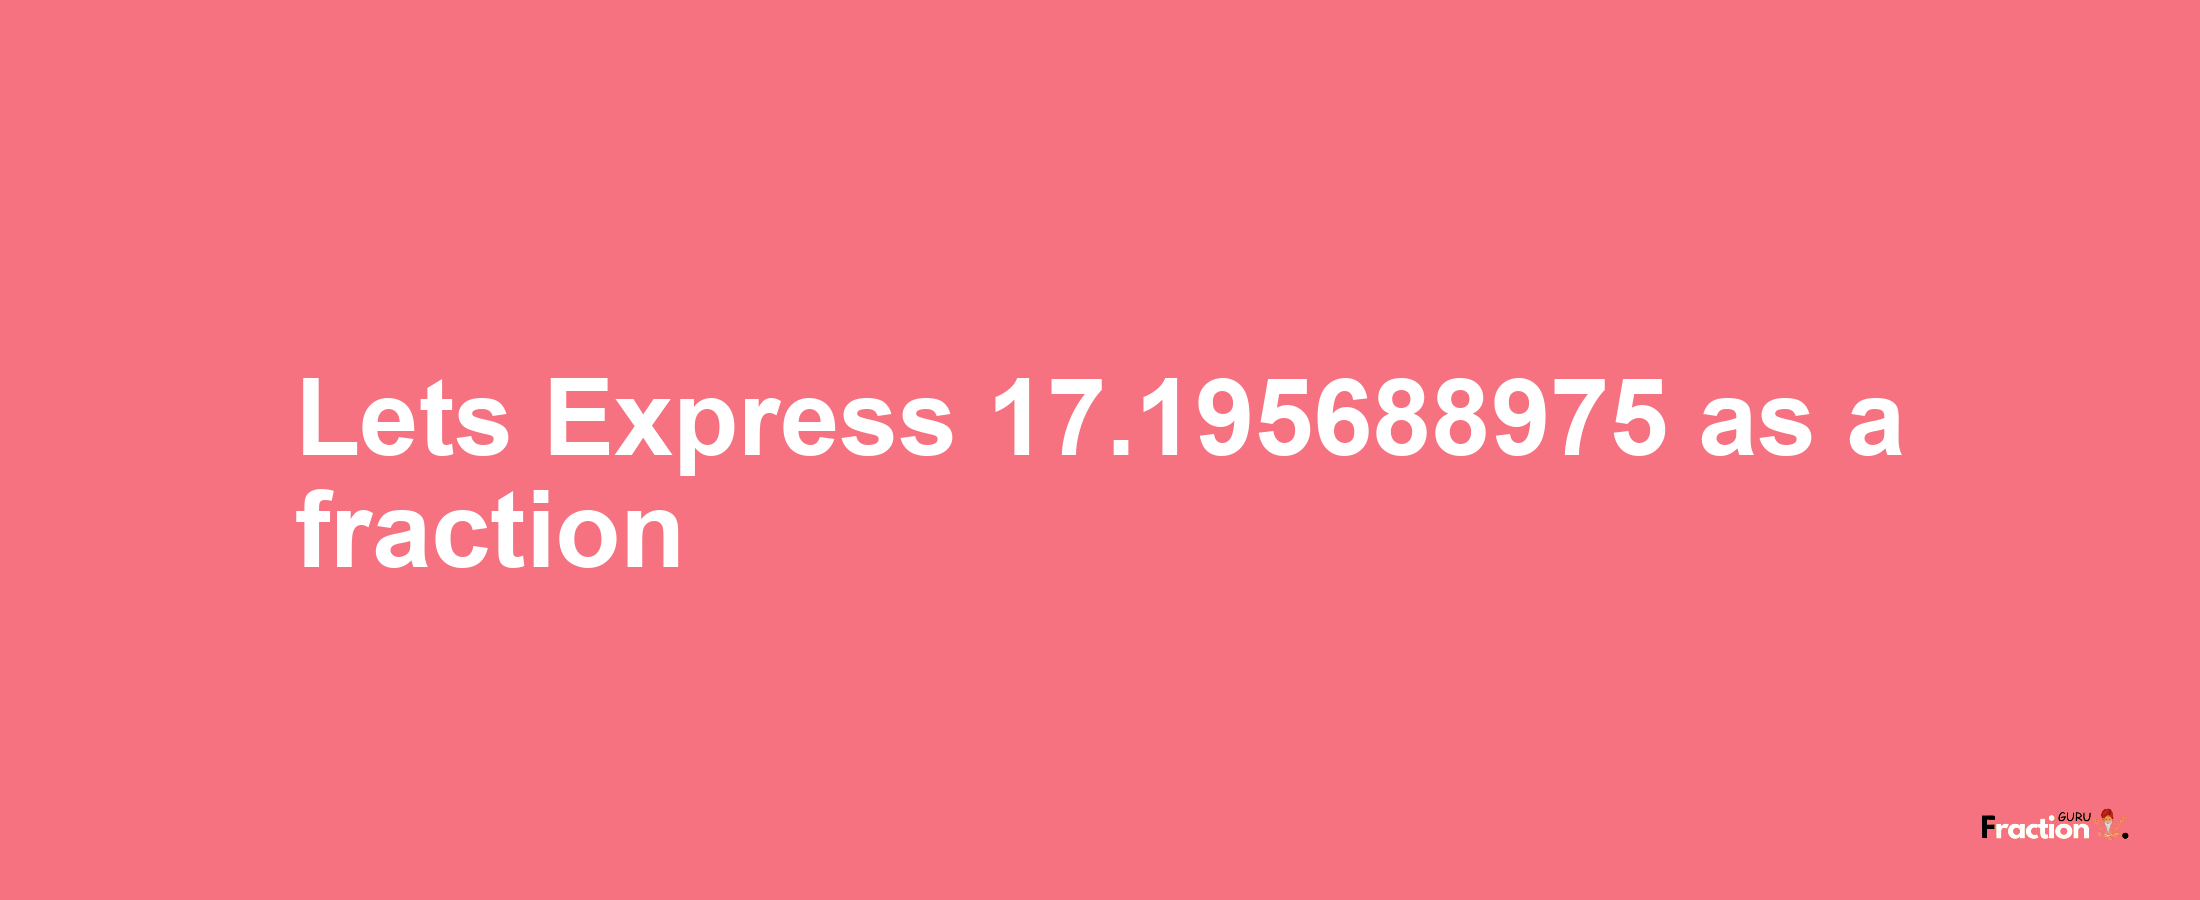 Lets Express 17.195688975 as afraction